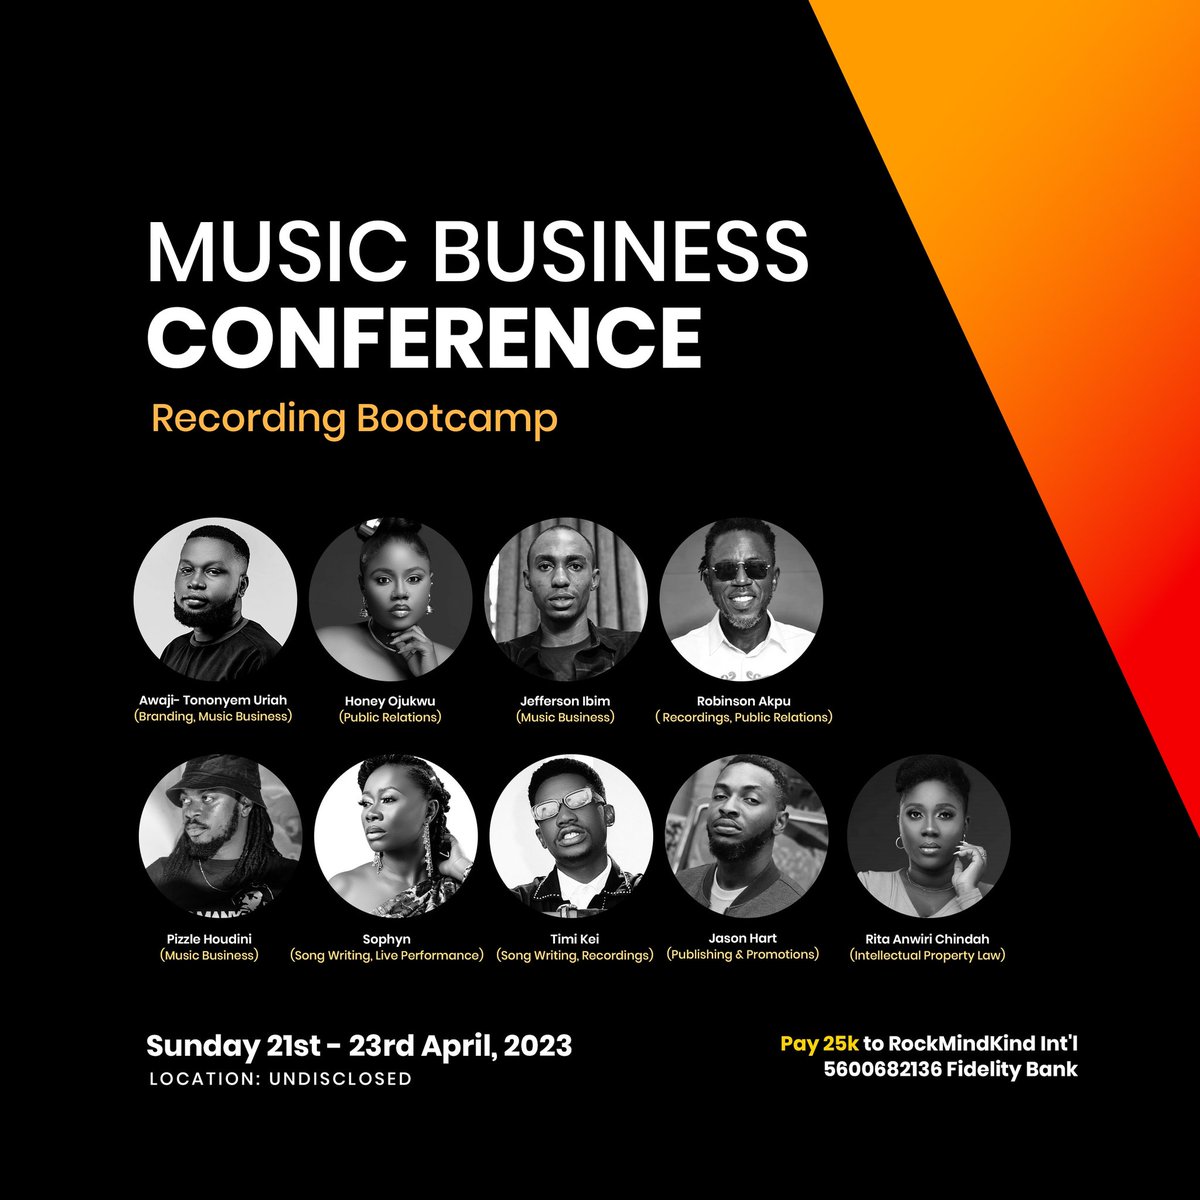 Music Business Conference Recording BOOTCAMP featuring an amazing array of industry faithfuls @thegreattontex @robinsonakpu @theibim @pizzlehoudini @ESMERALDOESQ @iamDDeal @Sophynmusic & more. Enquiries: 07083738885 #RSMG #MusicBusiness